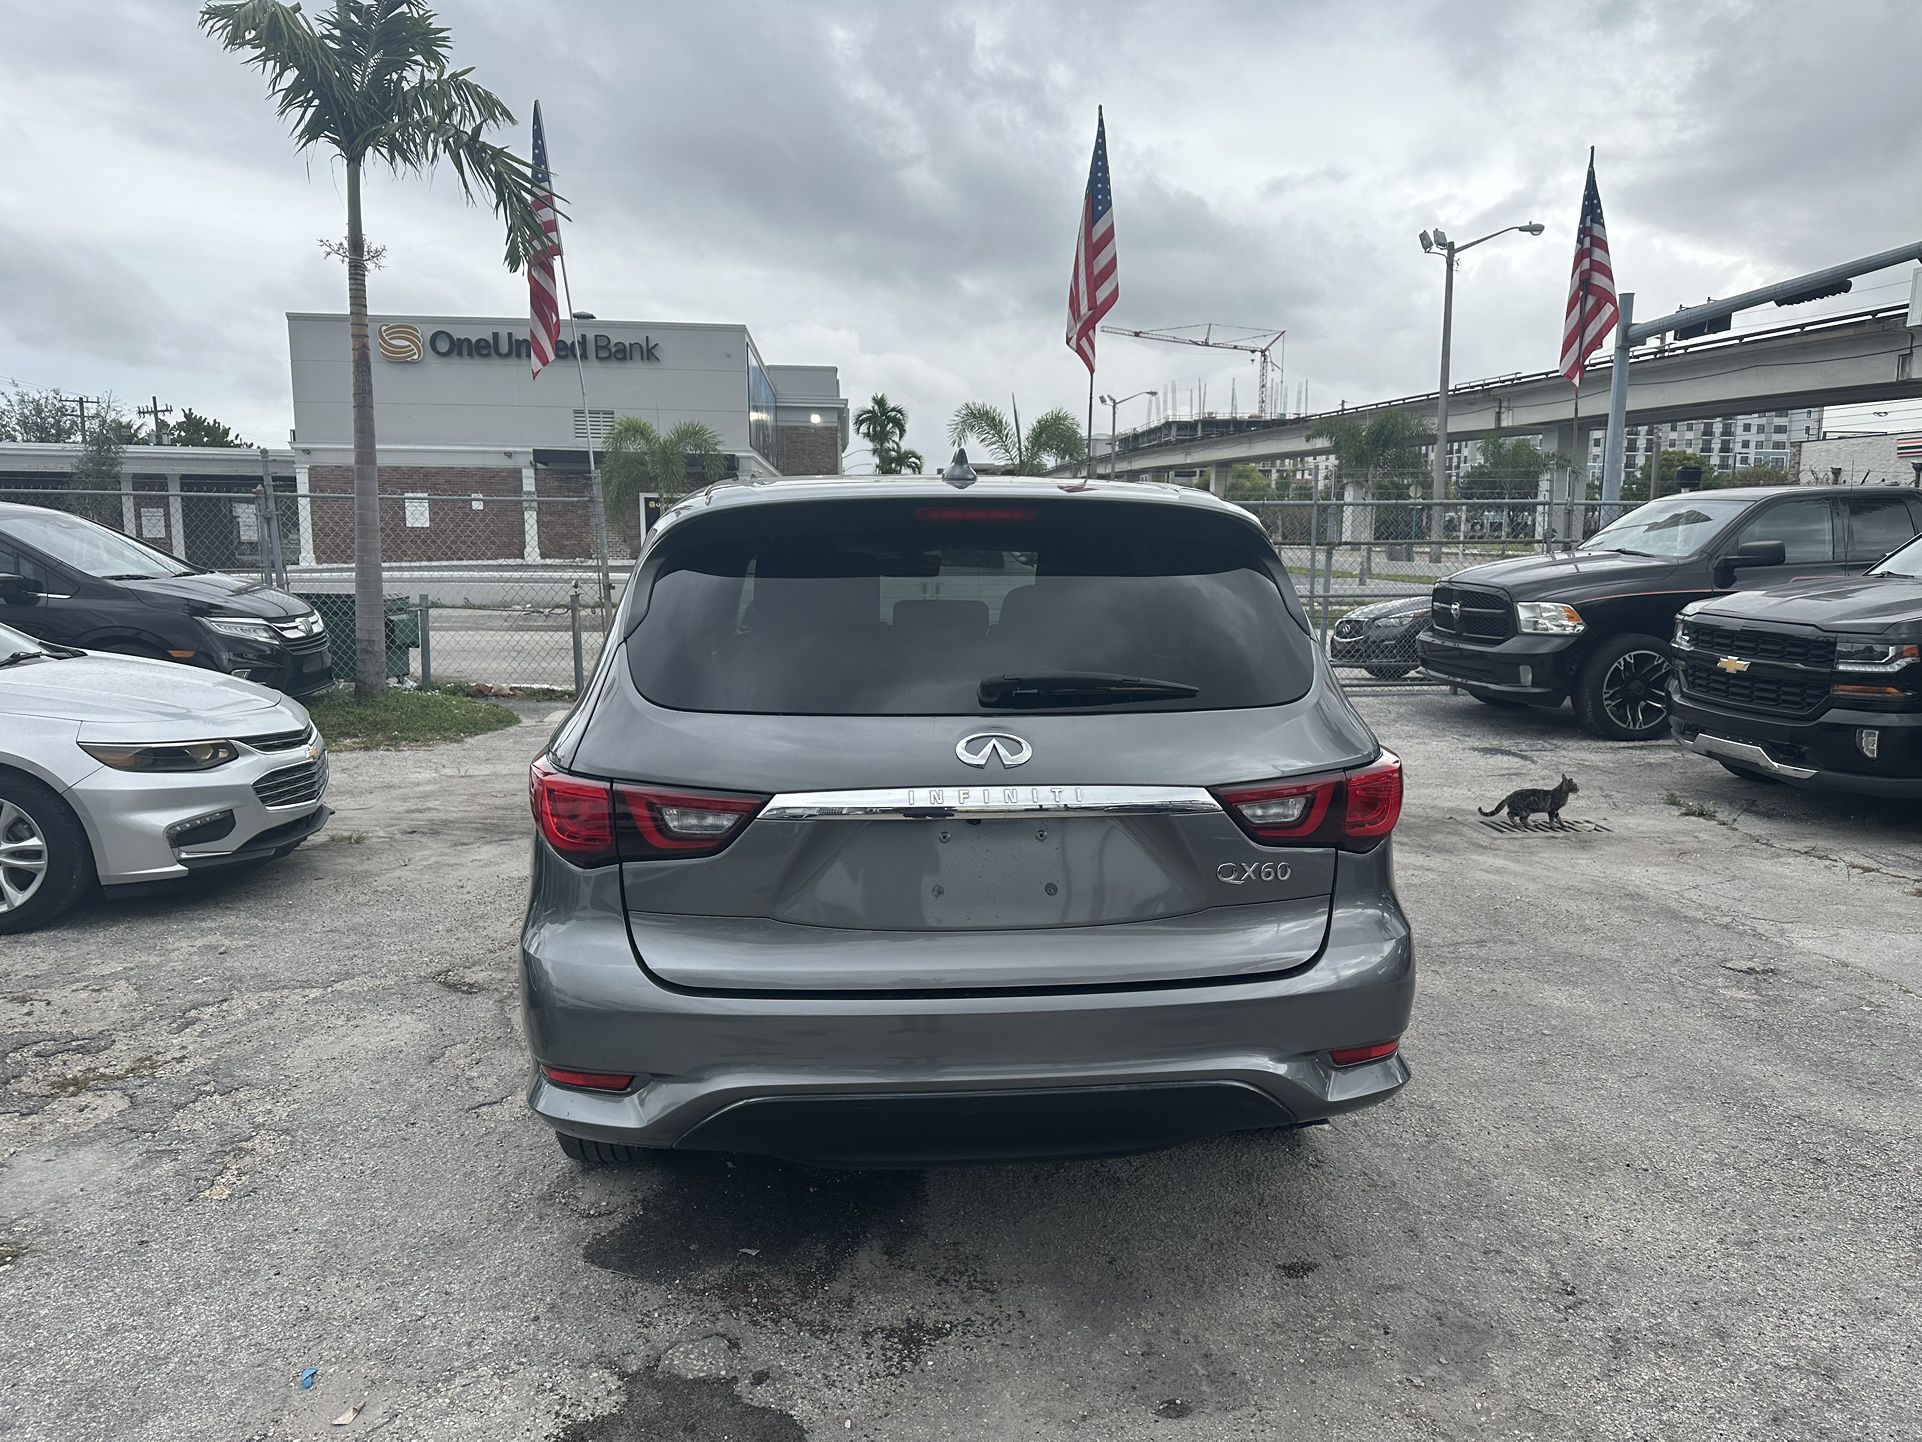 used 2019 infiniti qx60 - front view 3